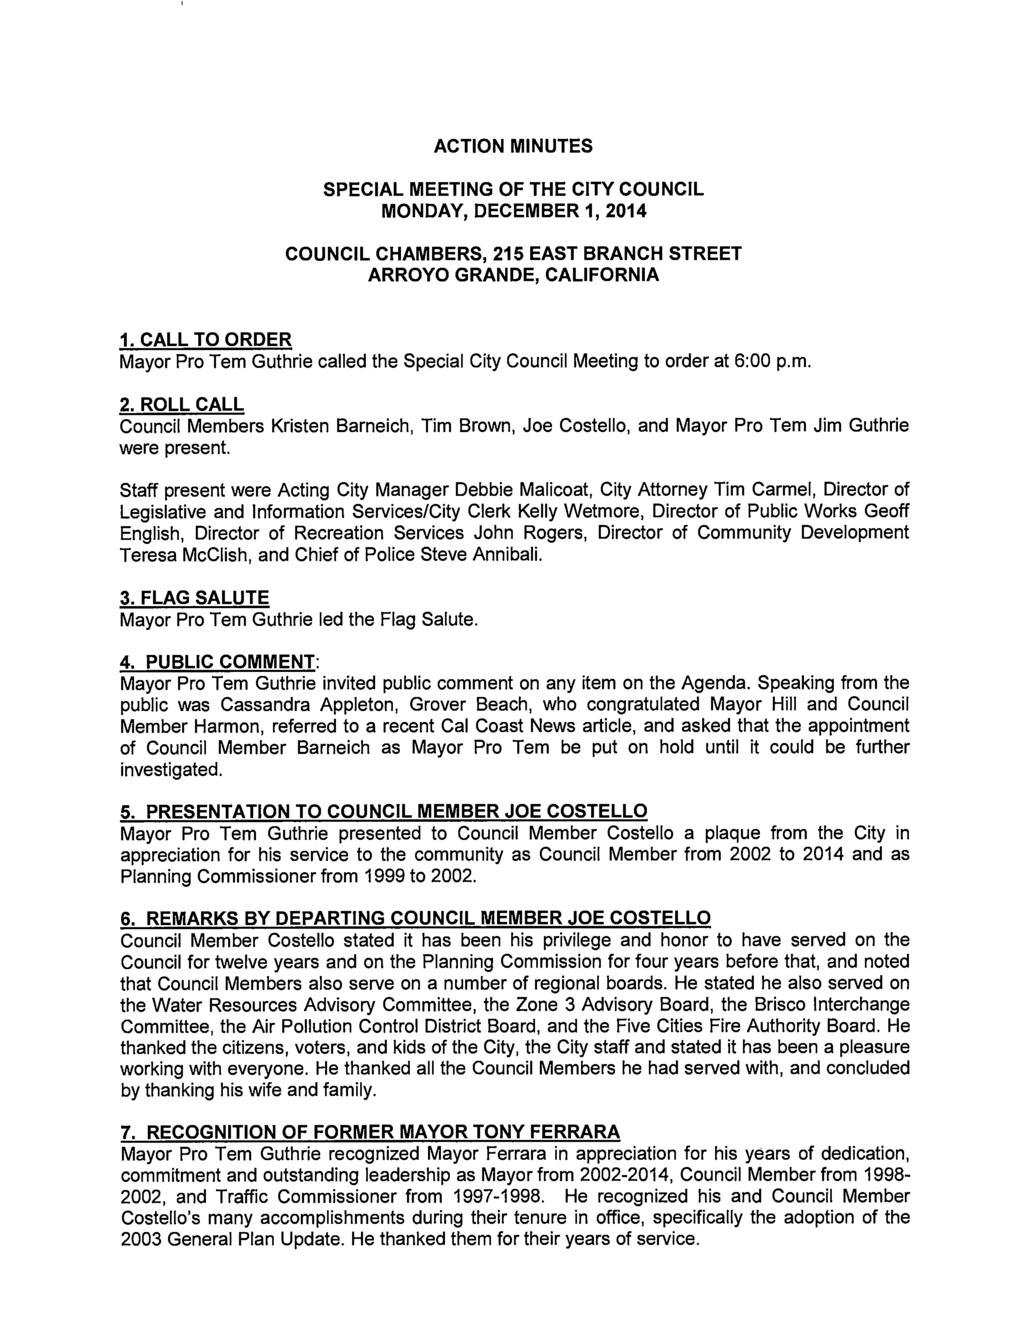 ACTION MINUTES SPECIAL MEETING OF THE CITY COUNCIL MONDAY, DECEMBER 1, 2014 COUNCIL CHAMBERS, 215 EAST BRANCH STREET ARROYO GRANDE, CALIFORNIA 1.